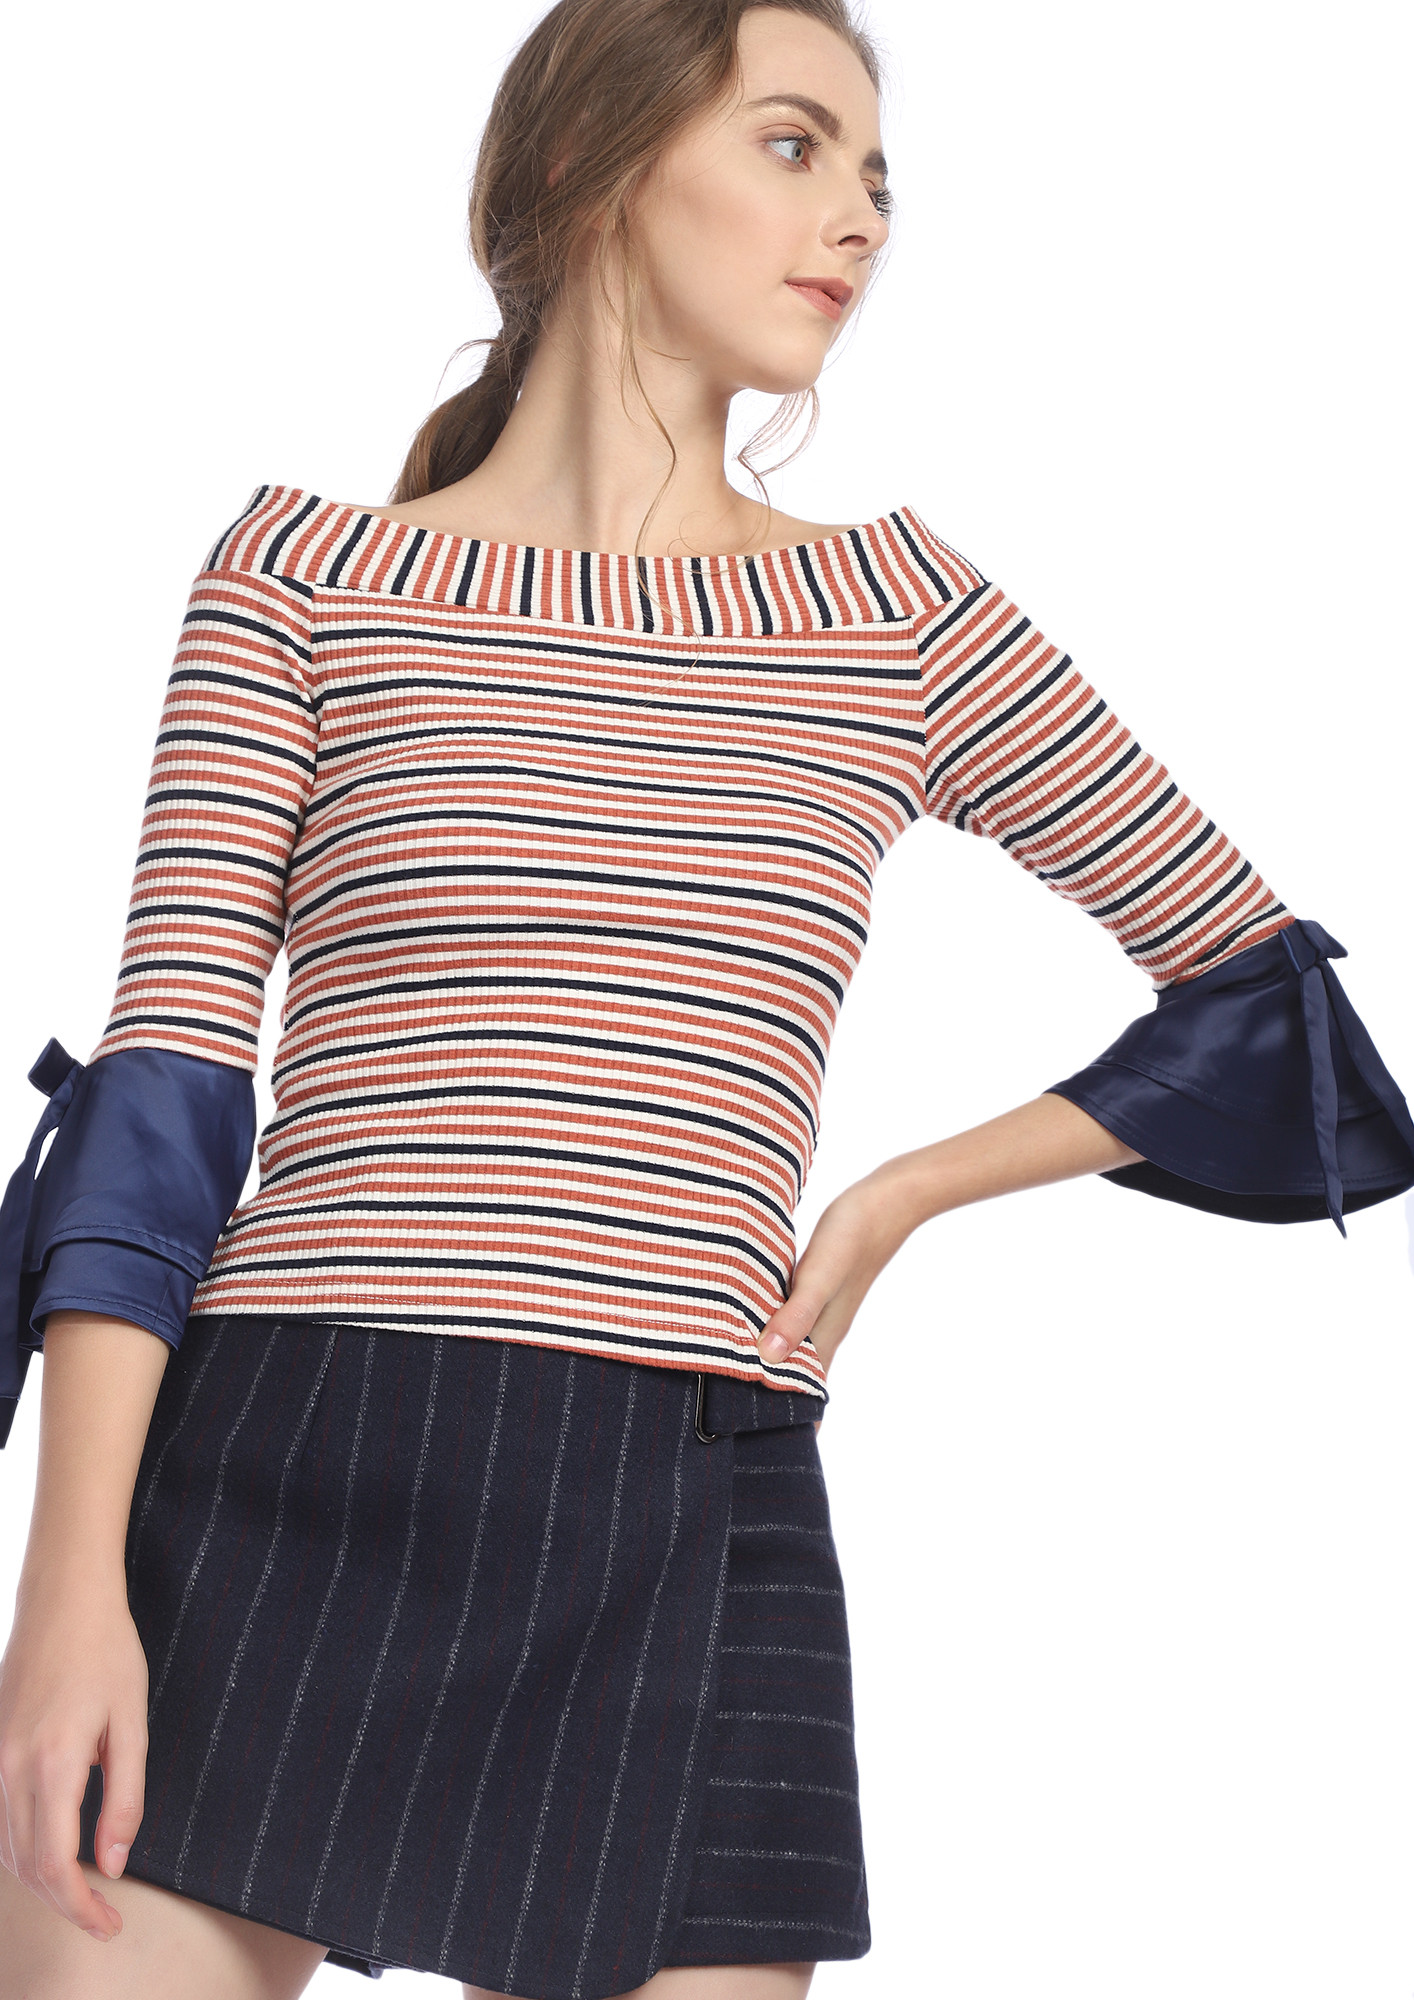 HOPE ANCHORS THE SOUL BLUE STRIPED TOP